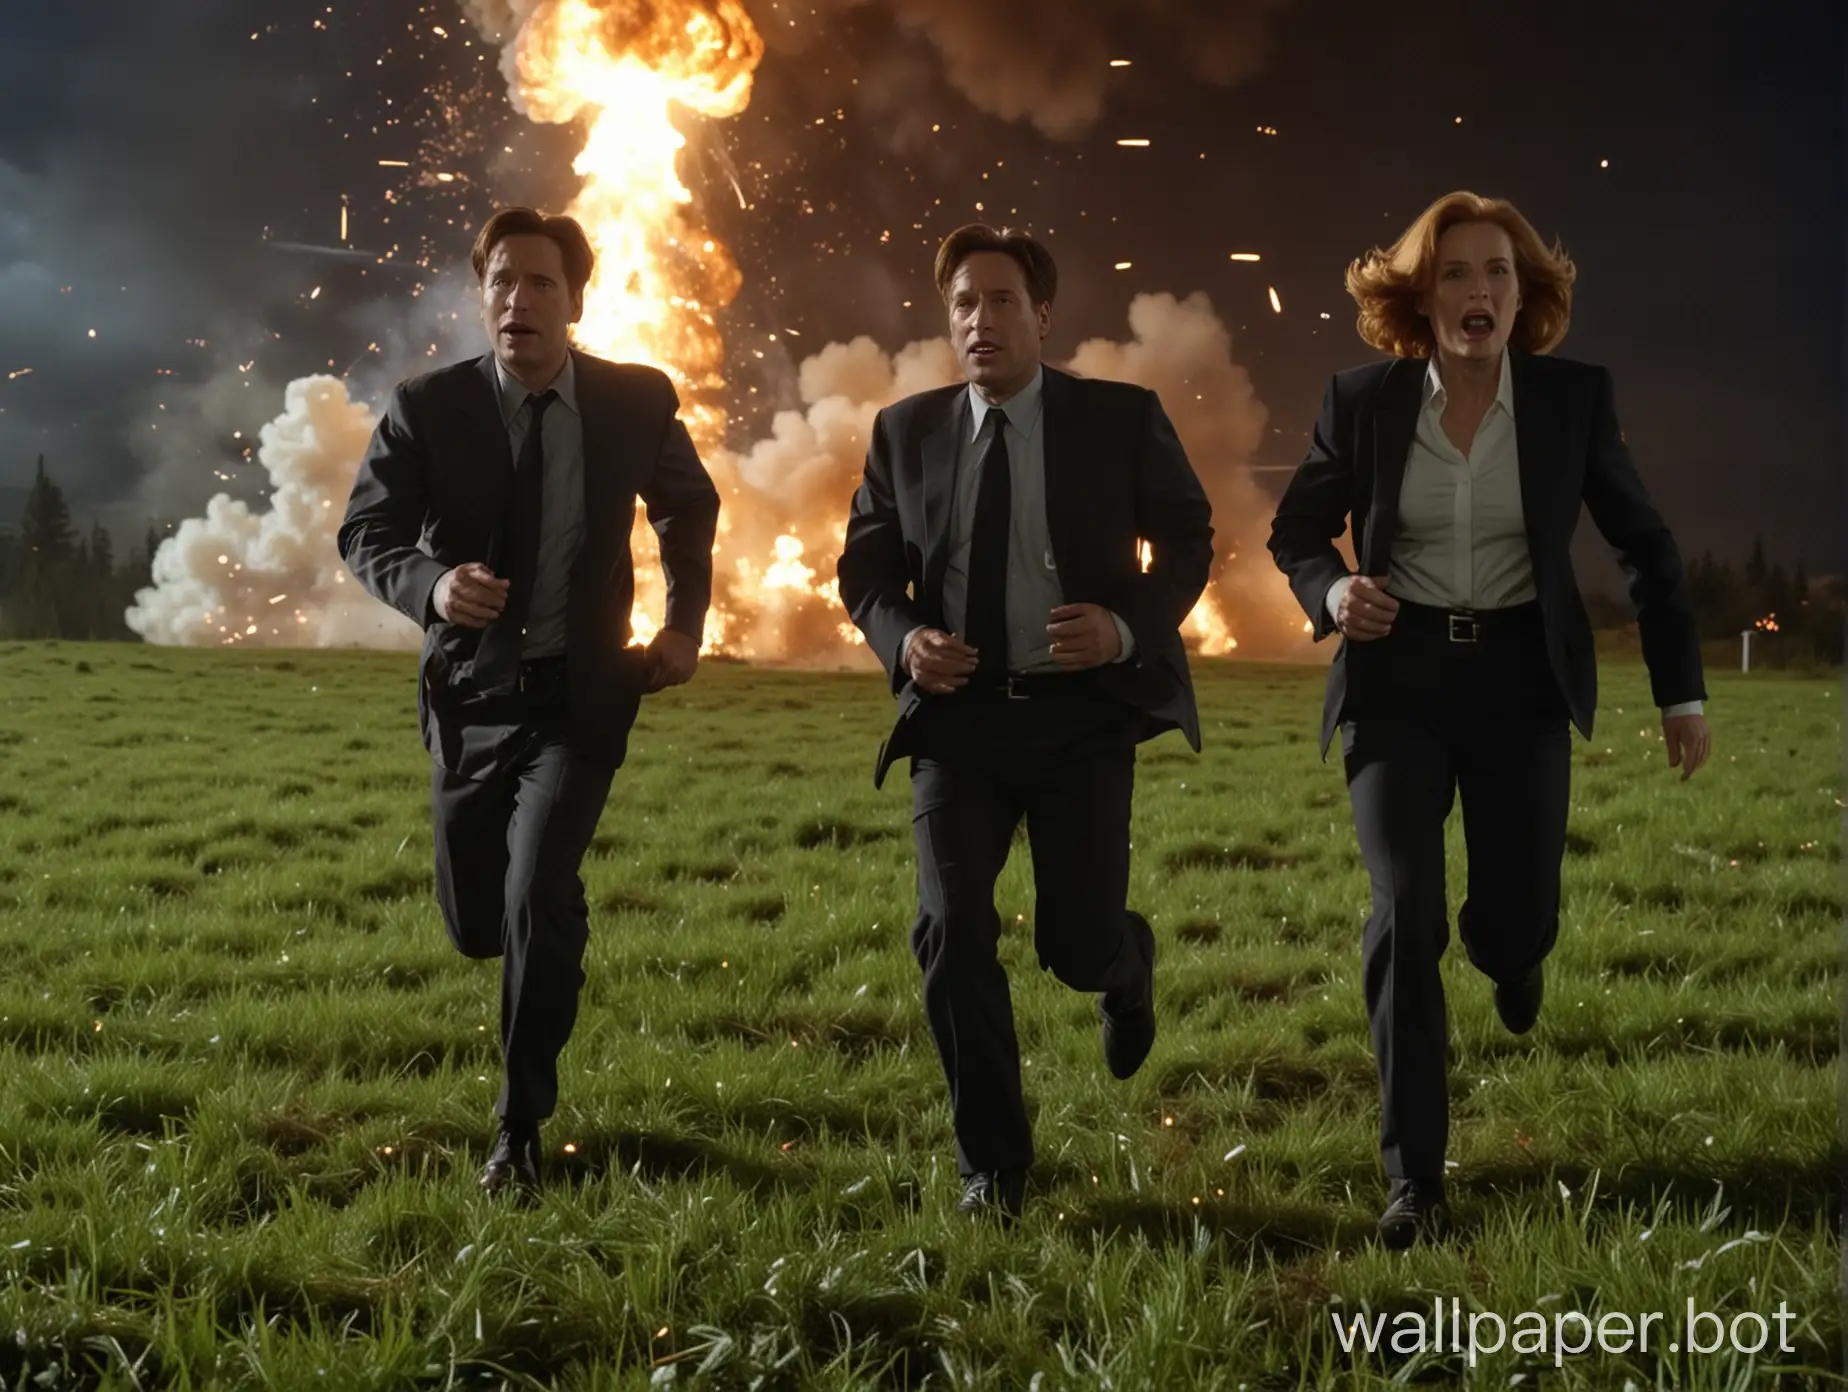 Mulder-and-Scully-Running-from-Alien-Spaceship-Amid-Explosions